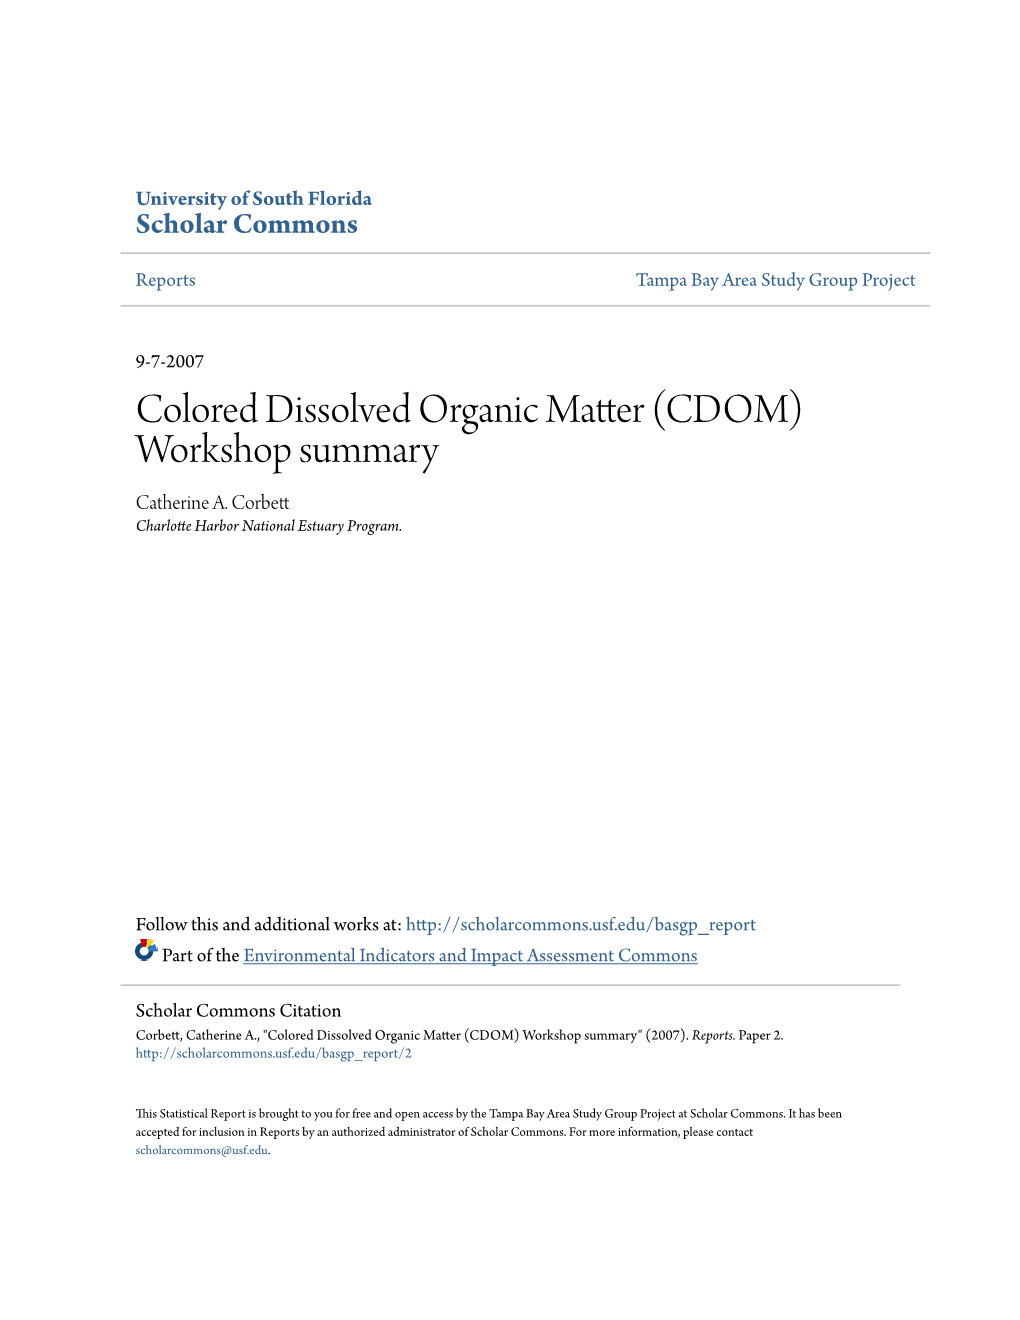 Colored Dissolved Organic Matter (CDOM) Workshop Summary Catherine A